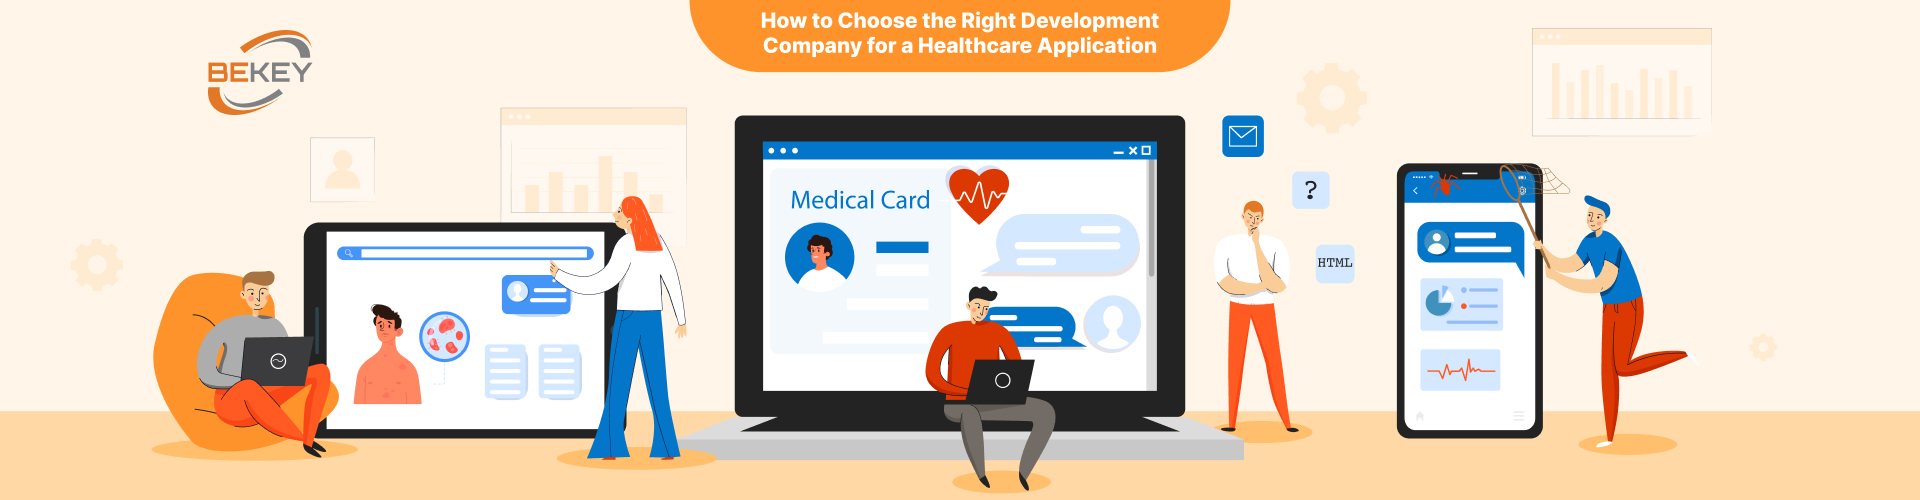 How to Choose the Right Development Company for a Healthcare Application - image